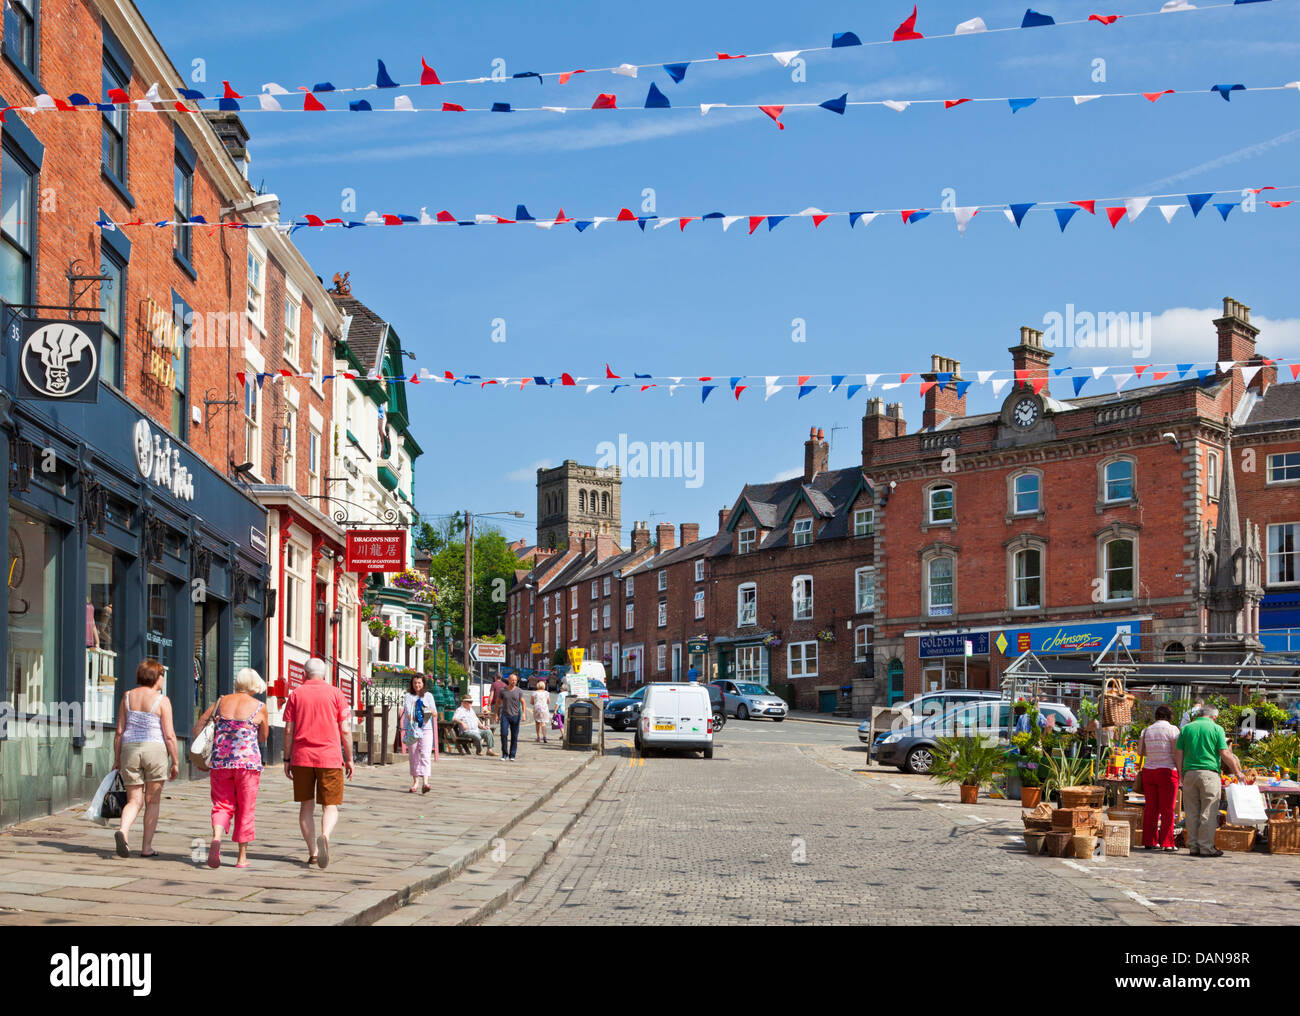 Town centre and market place decked with bunting Ashbourne Derbyshire England UK GB EU Europe Stock Photo